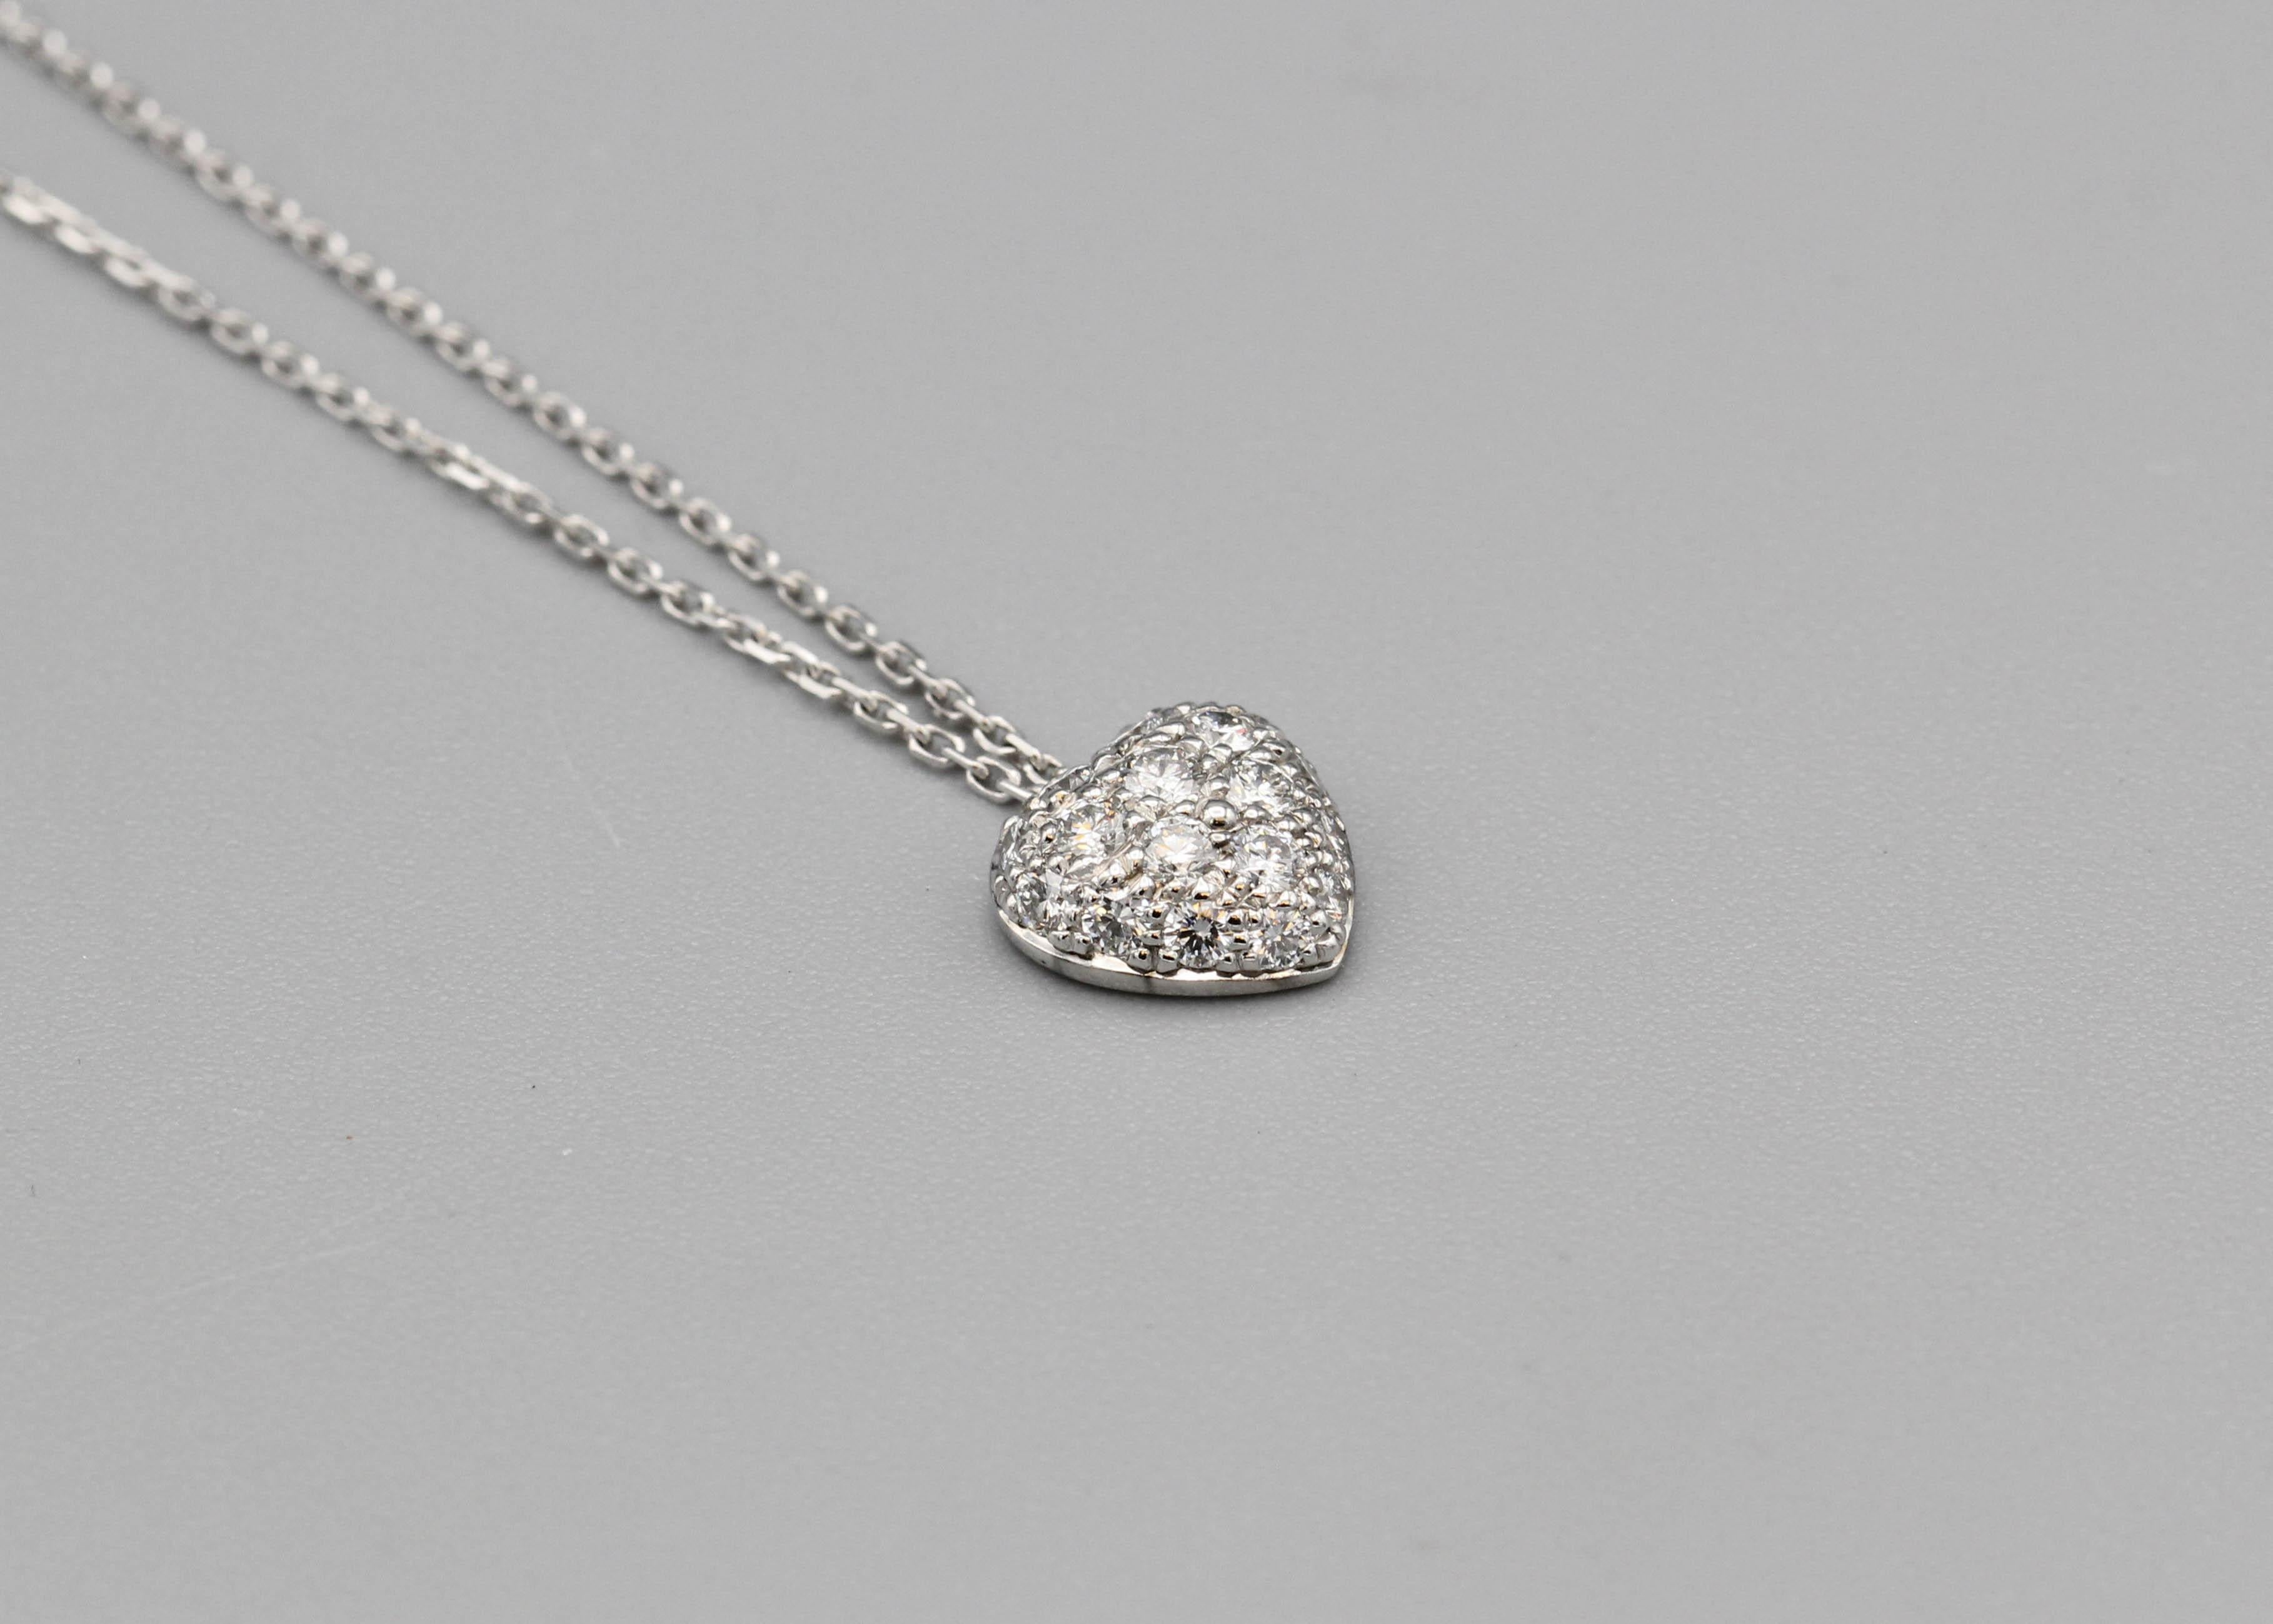 Unveil your inner romantic with the Cartier Diamond 18k White Gold Heart Shaped Pendant Necklace, a symbol of love and elegance that captures the essence of Cartier's timeless craftsmanship. This exquisite pendant necklace pairs the radiance of